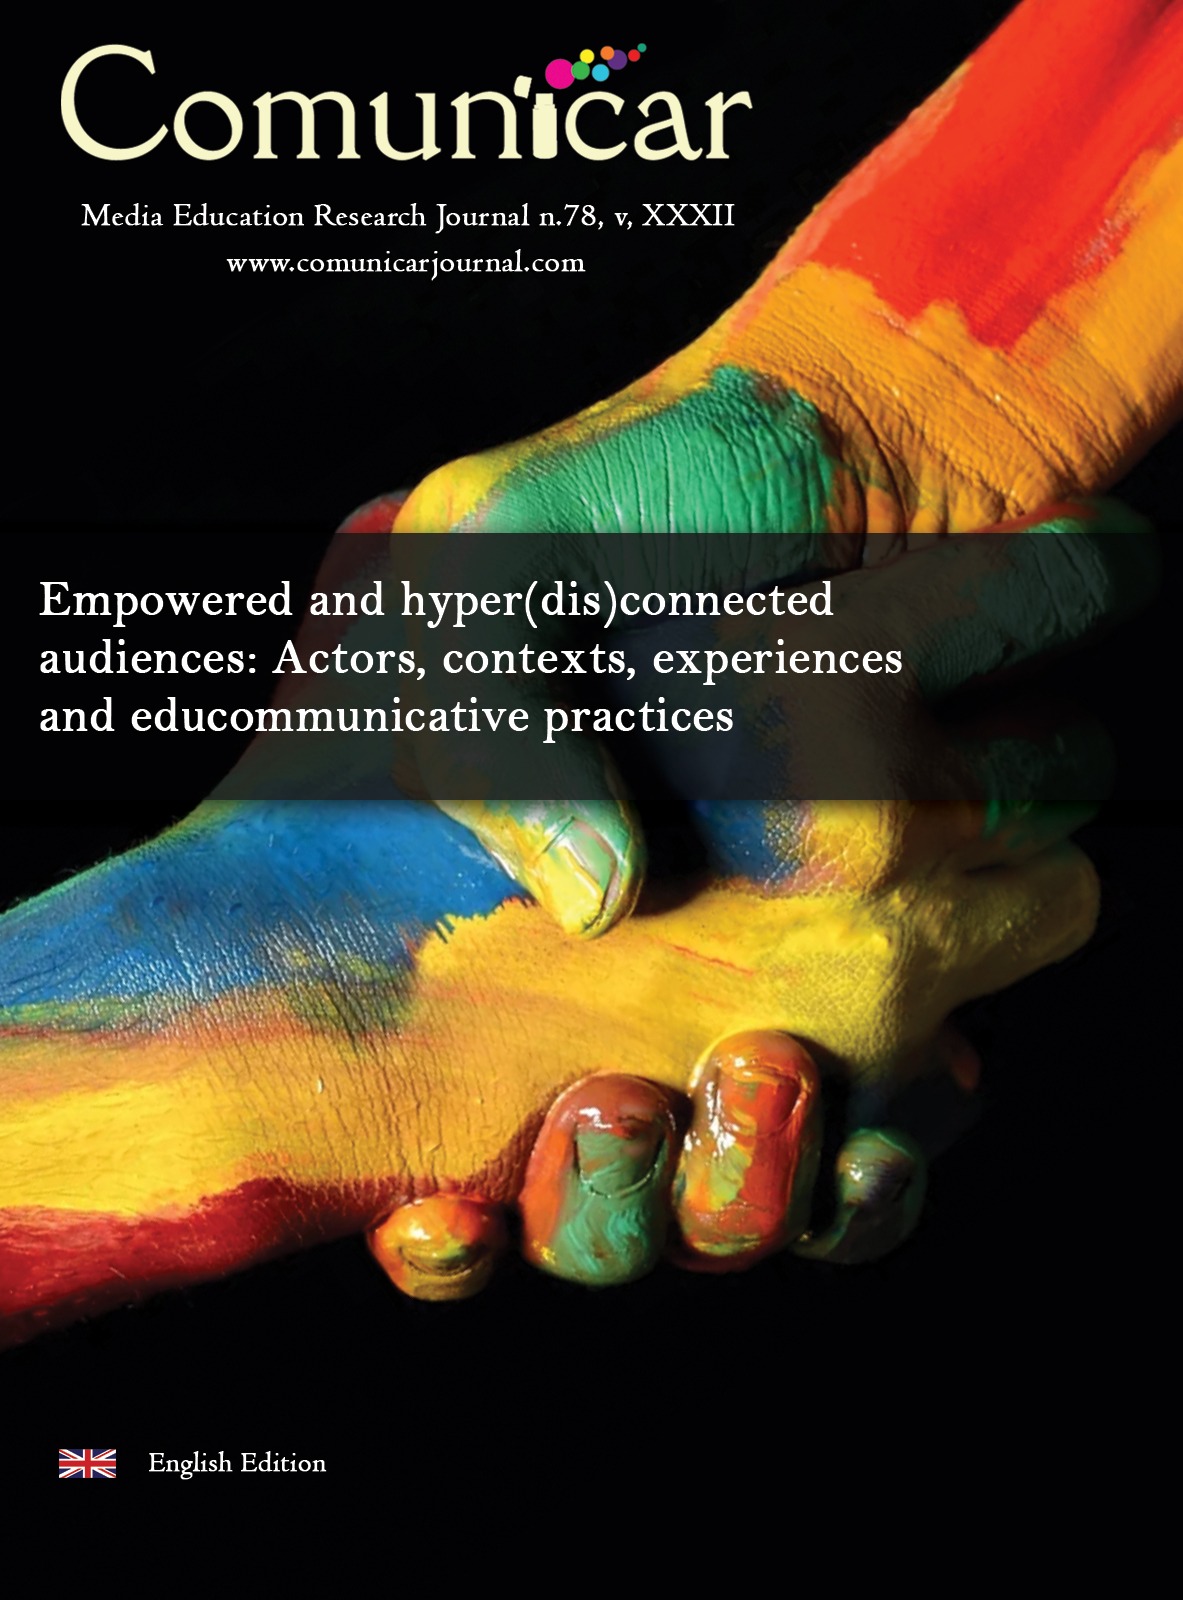 Empowered and hyper (dis)connected audiences: Actors, contexts, experiences and educommunicative  practices